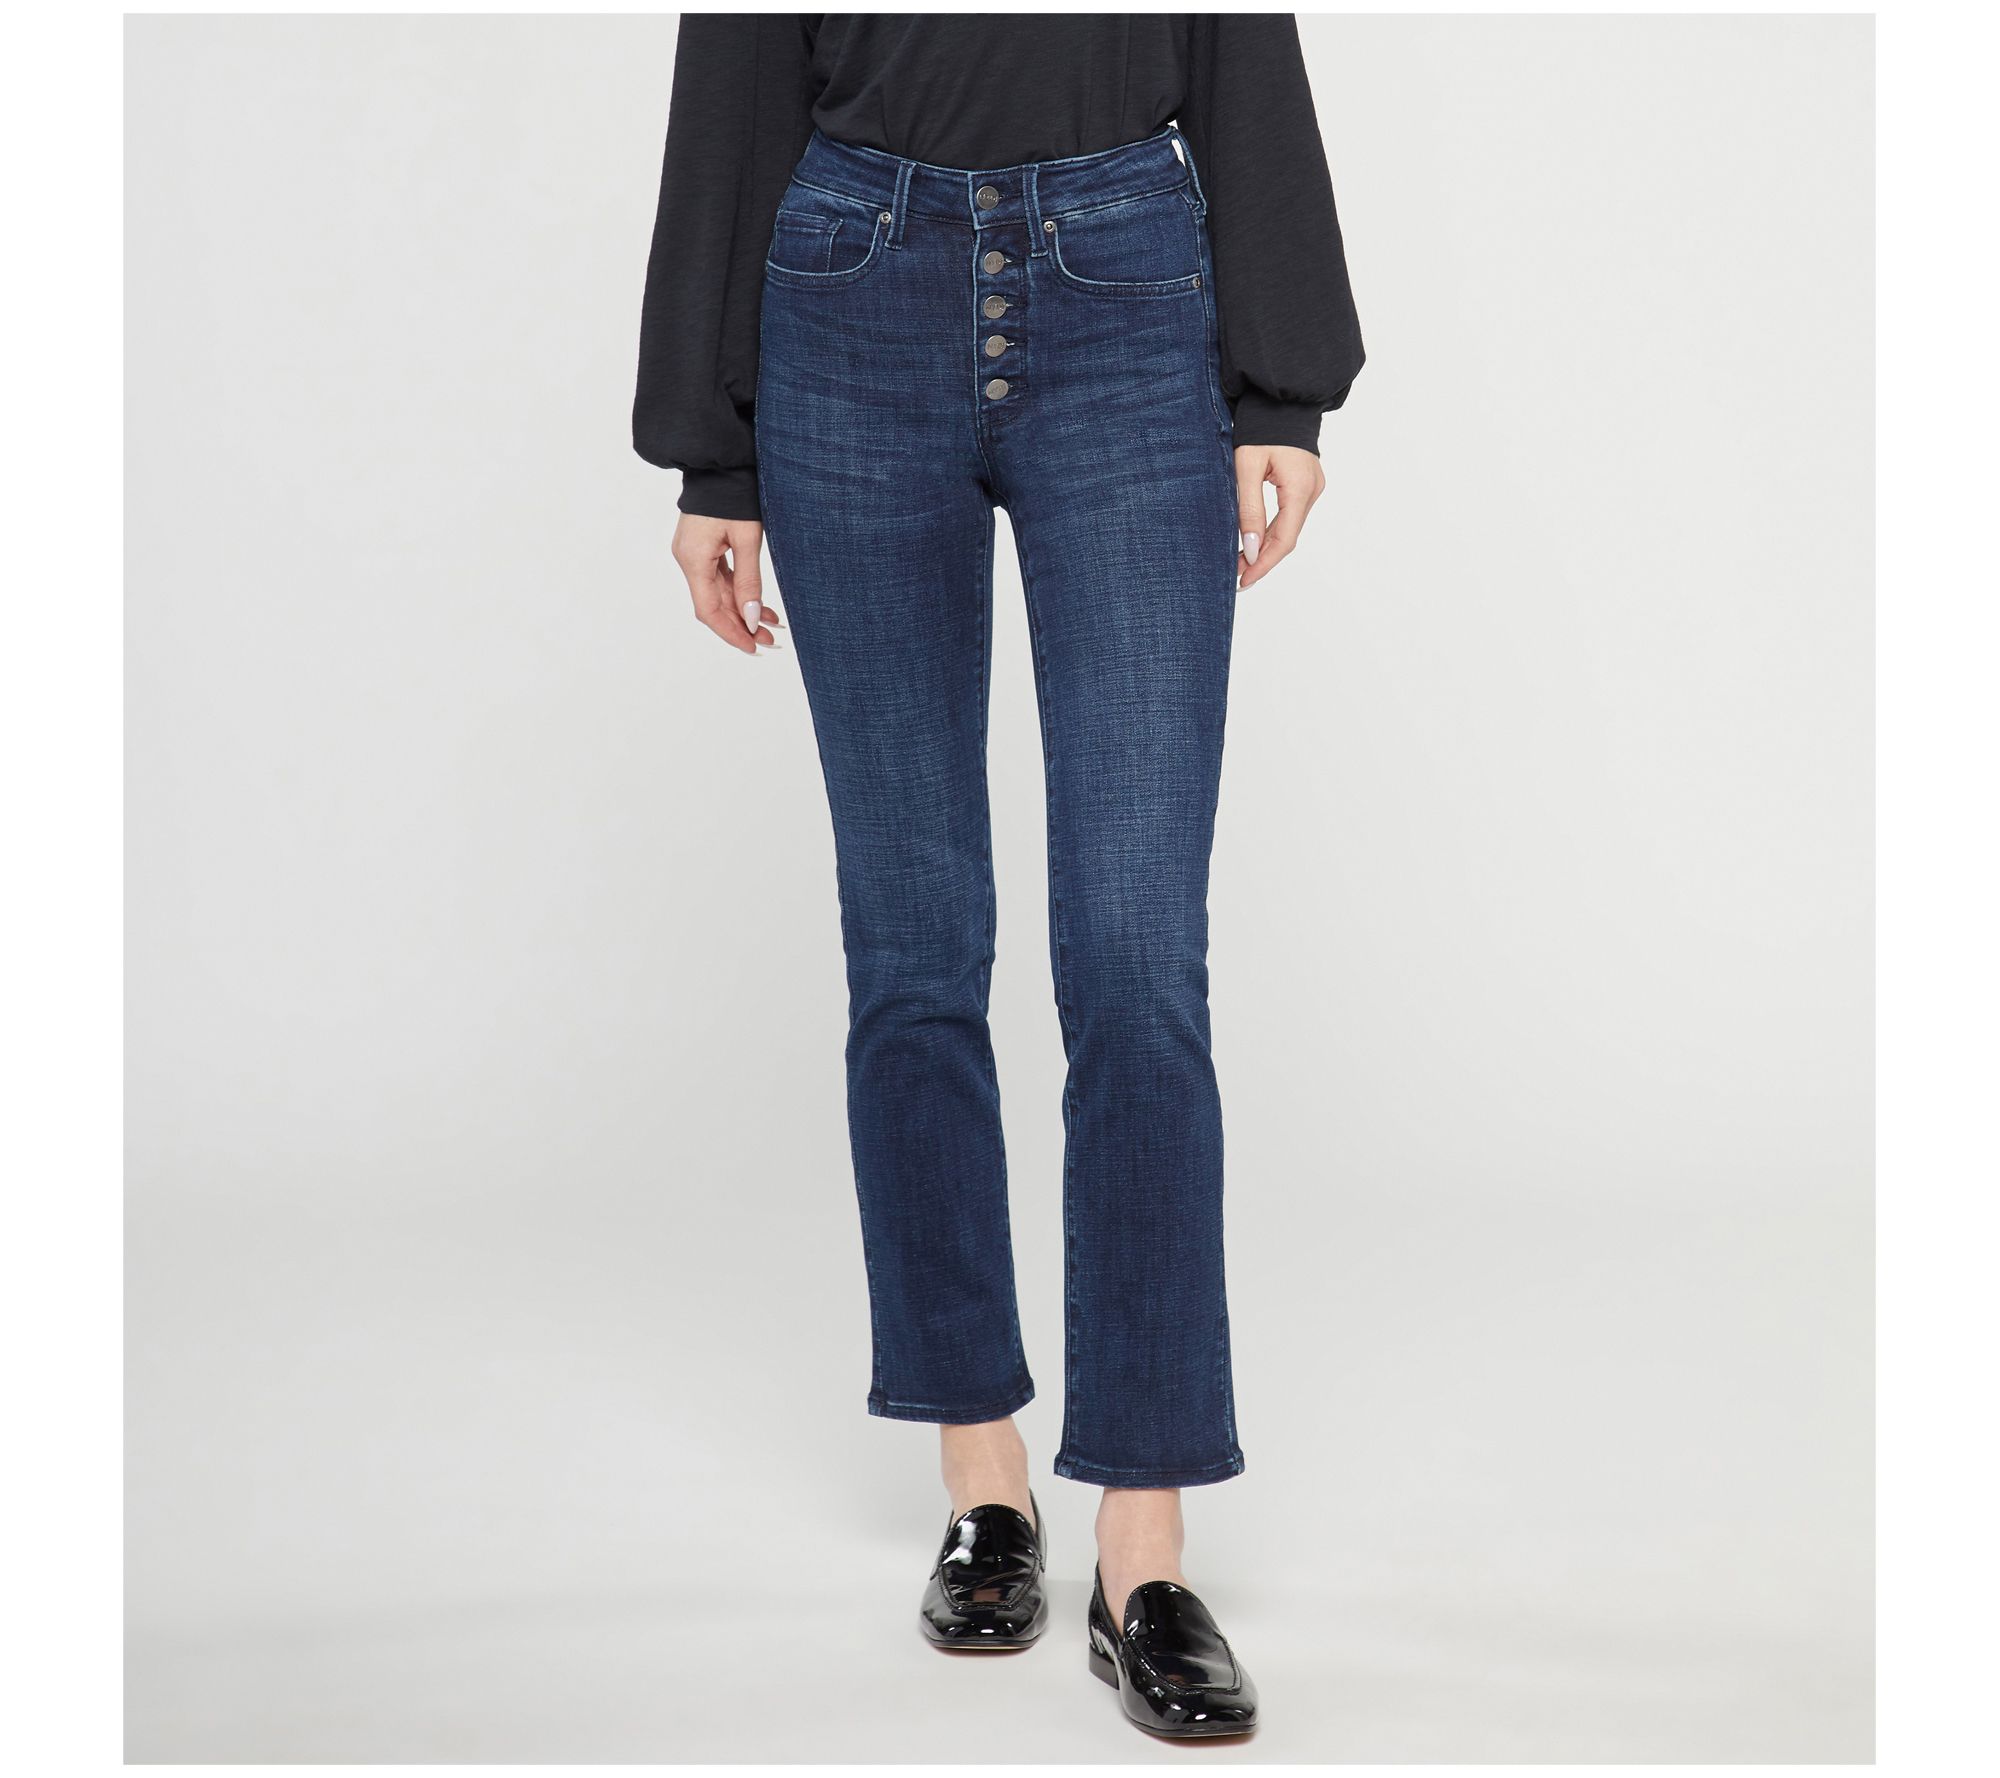 NYDJ High Waisted Straight Jean with Button Fly - QVC.com